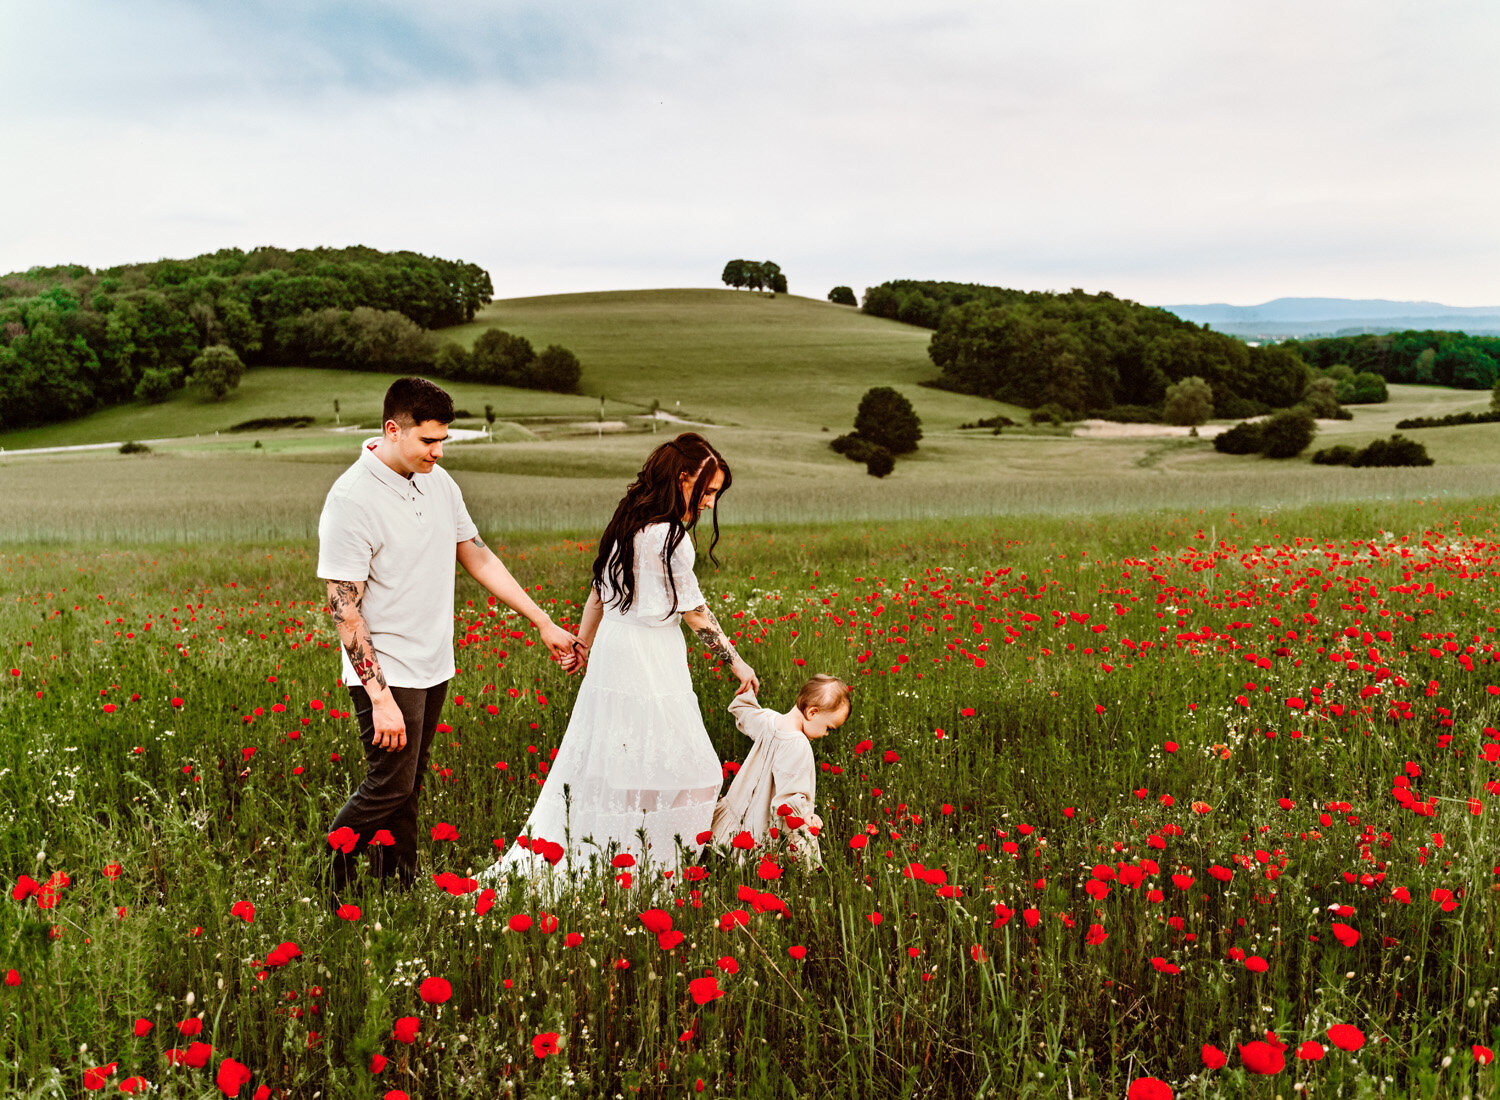 young-family-with-baby-girl-palying-in-poppy-flower-field-in-ramstein-family-photographer-sarah-havens-kaiserslautern-germany (12).jpg